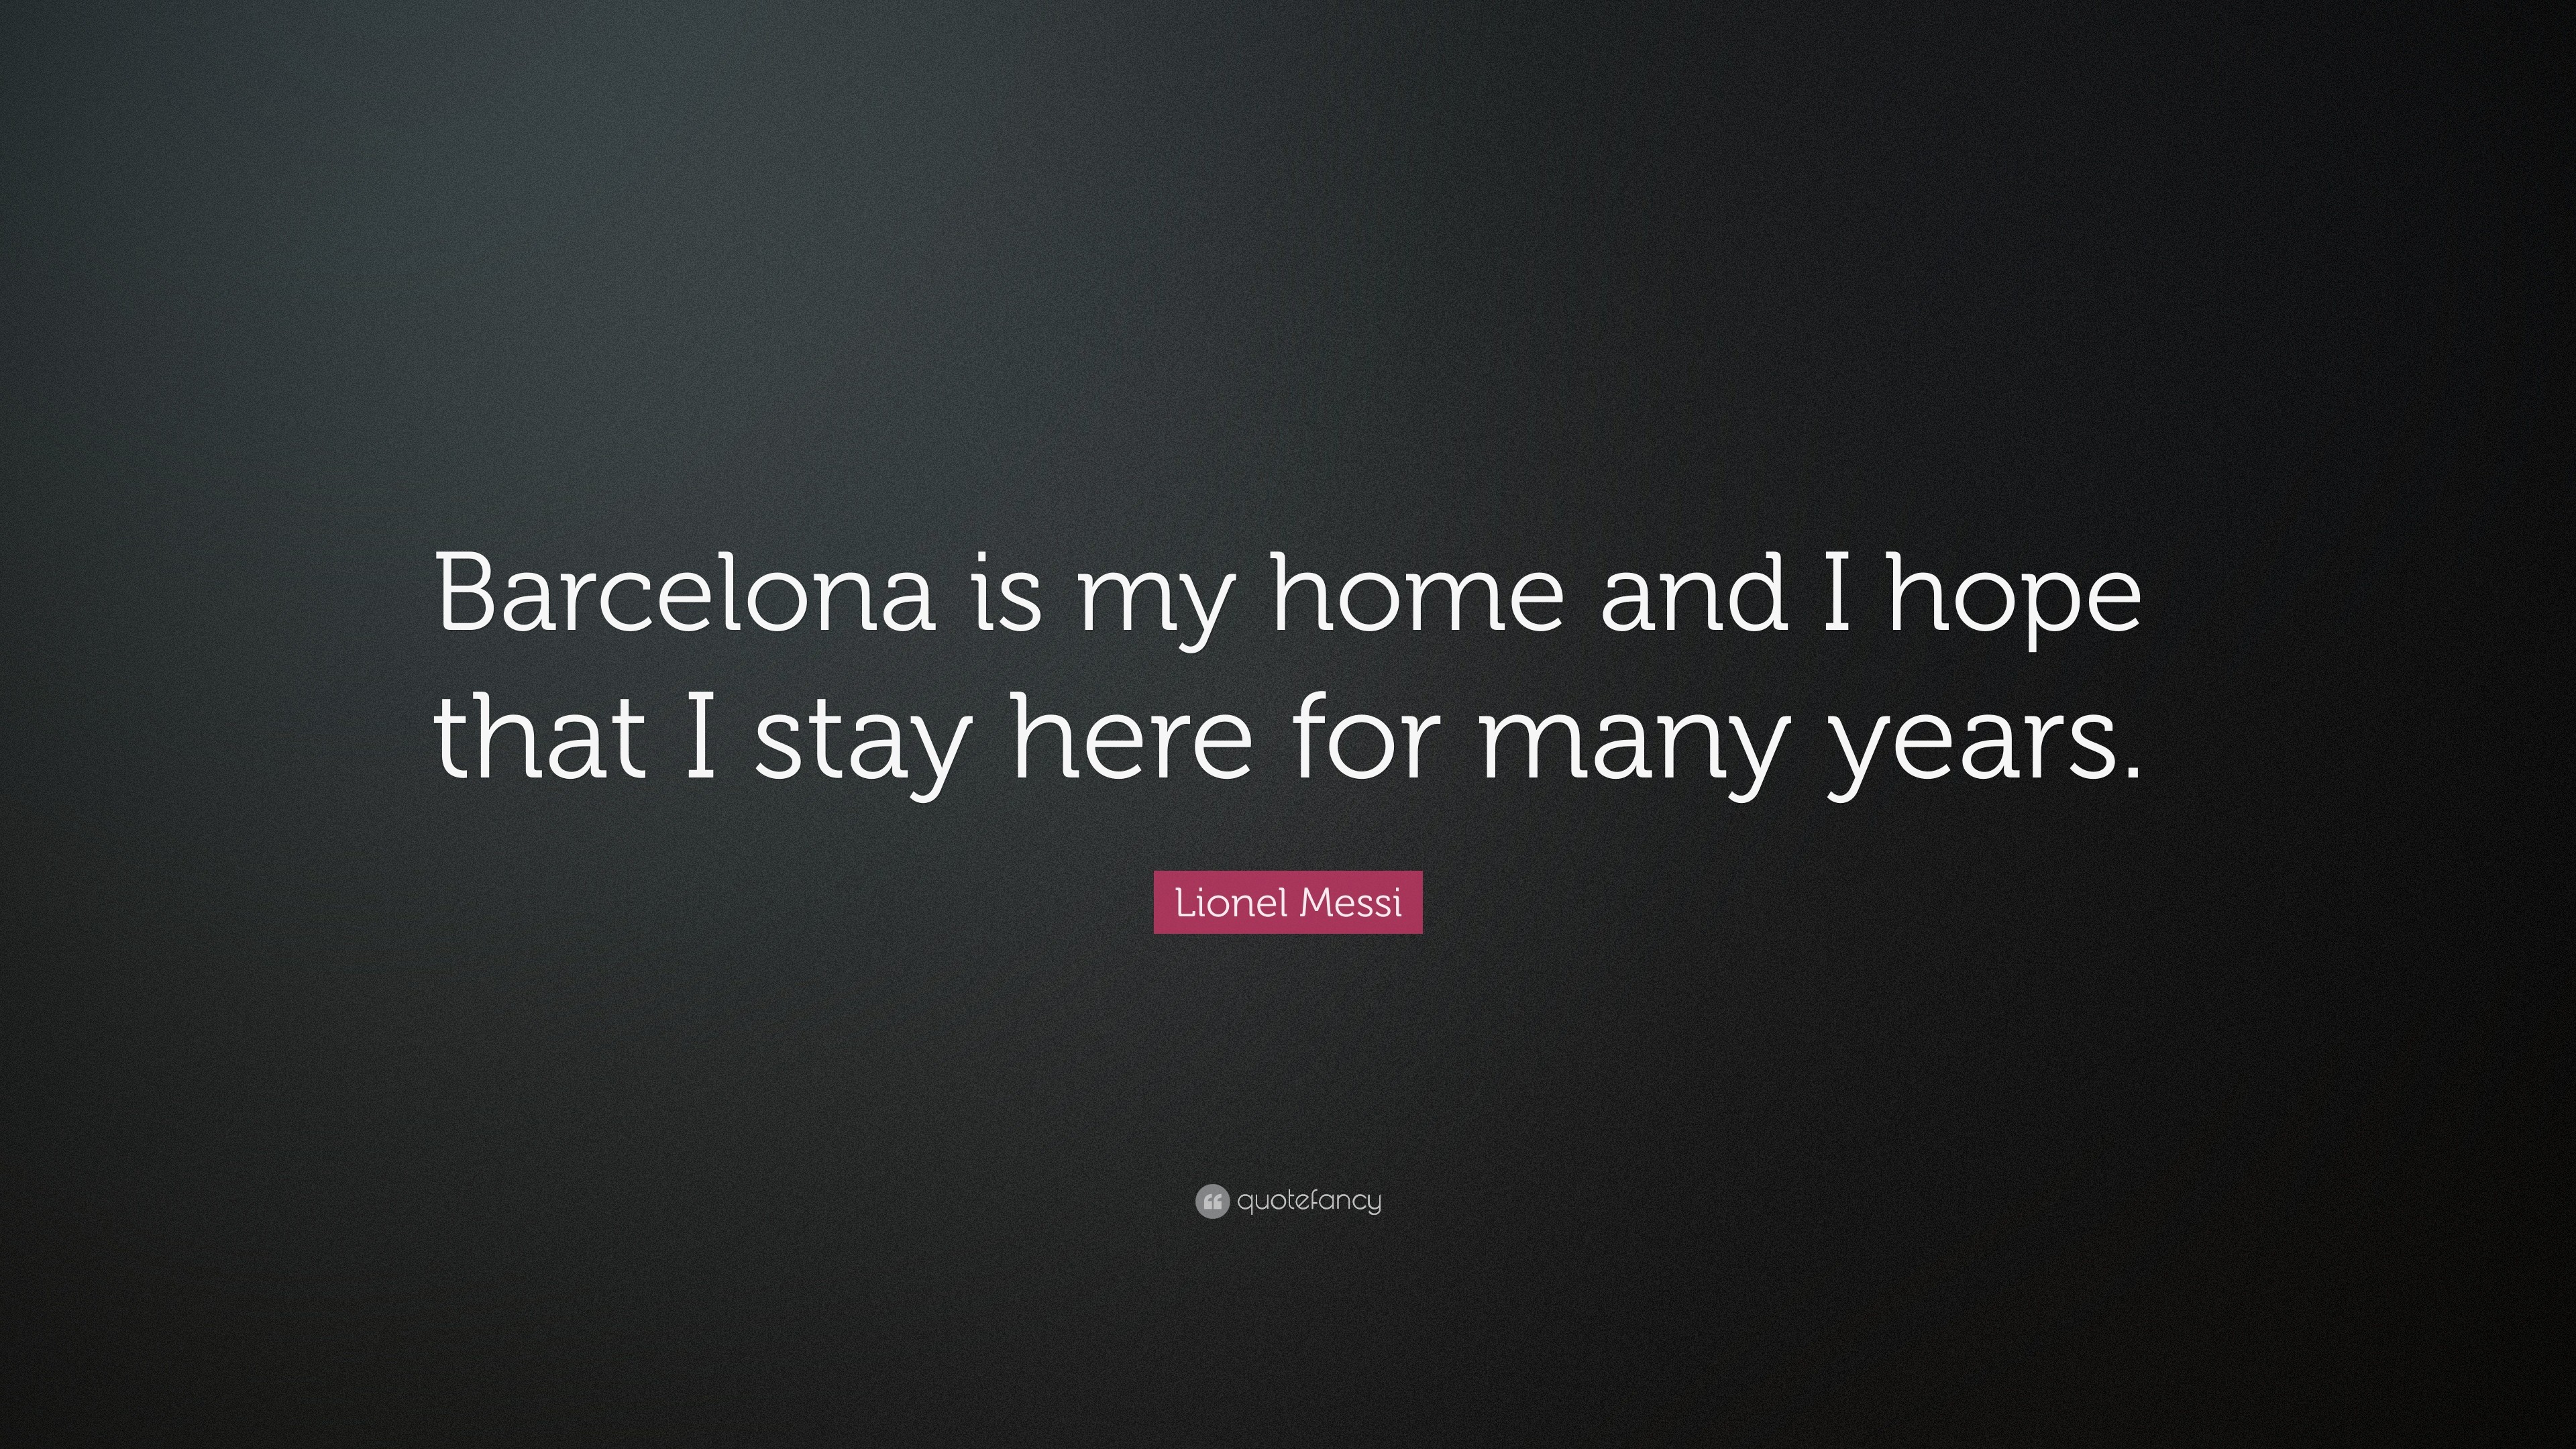 3840x2160 Lionel Messi Quote: “Barcelona is my home and I hope that I stay here